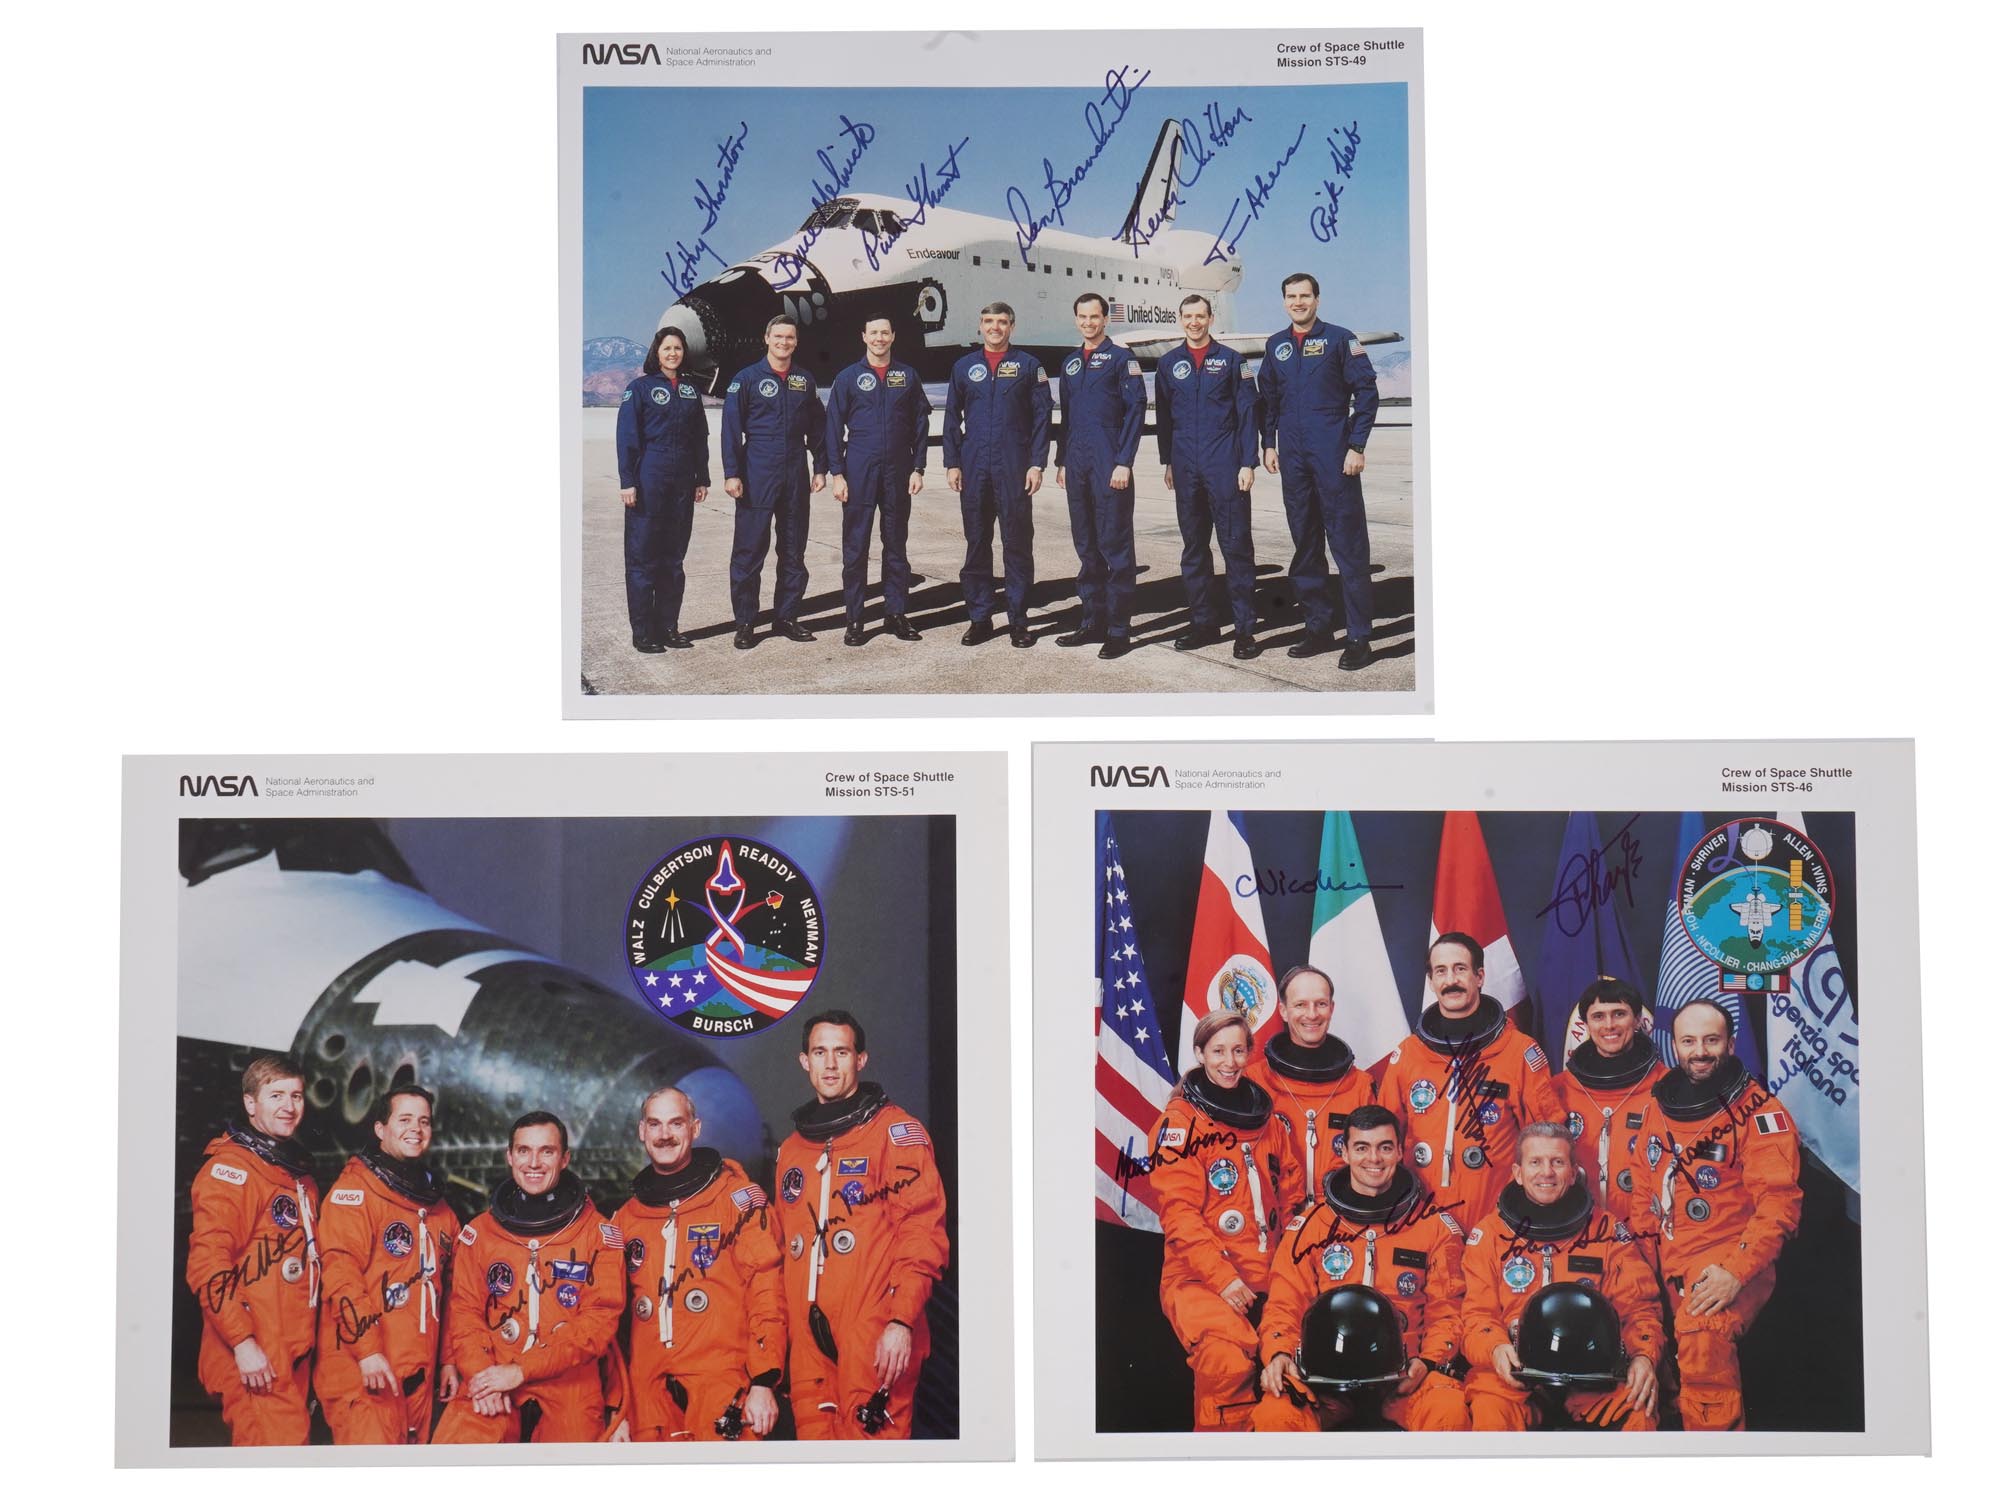 LOT 15 NASA PHOTOS AUTOGRAPHED BY SHUTTLES CREWS PIC-3